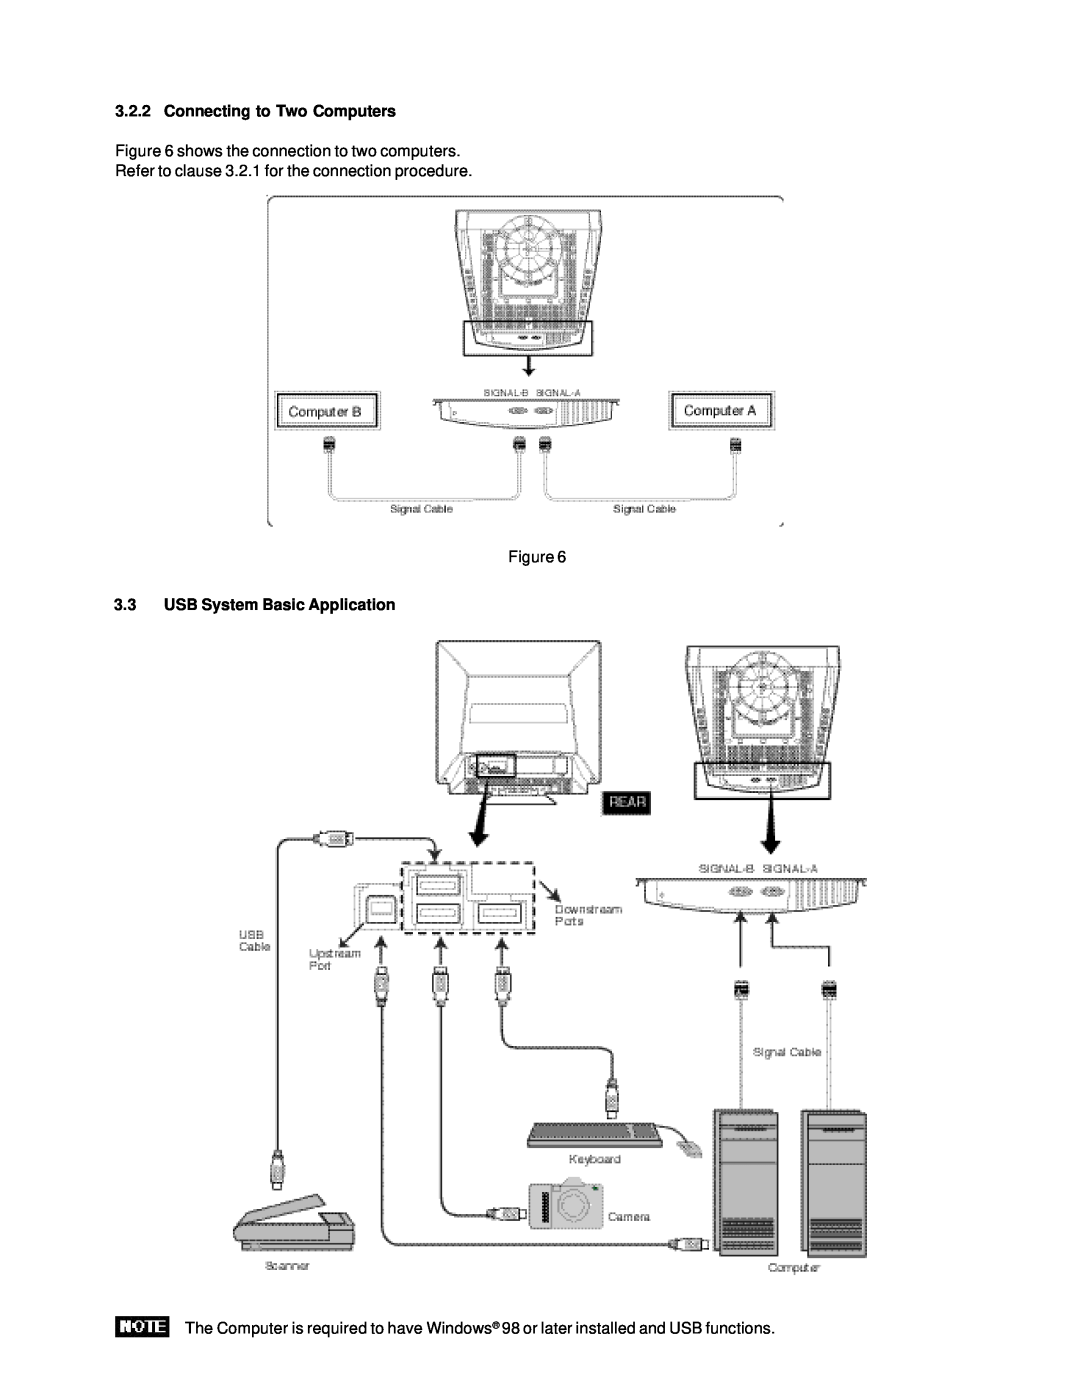 Compaq 1220 manual Connecting to Two Computers, shows the connection to two computers, USB System Basic Application 